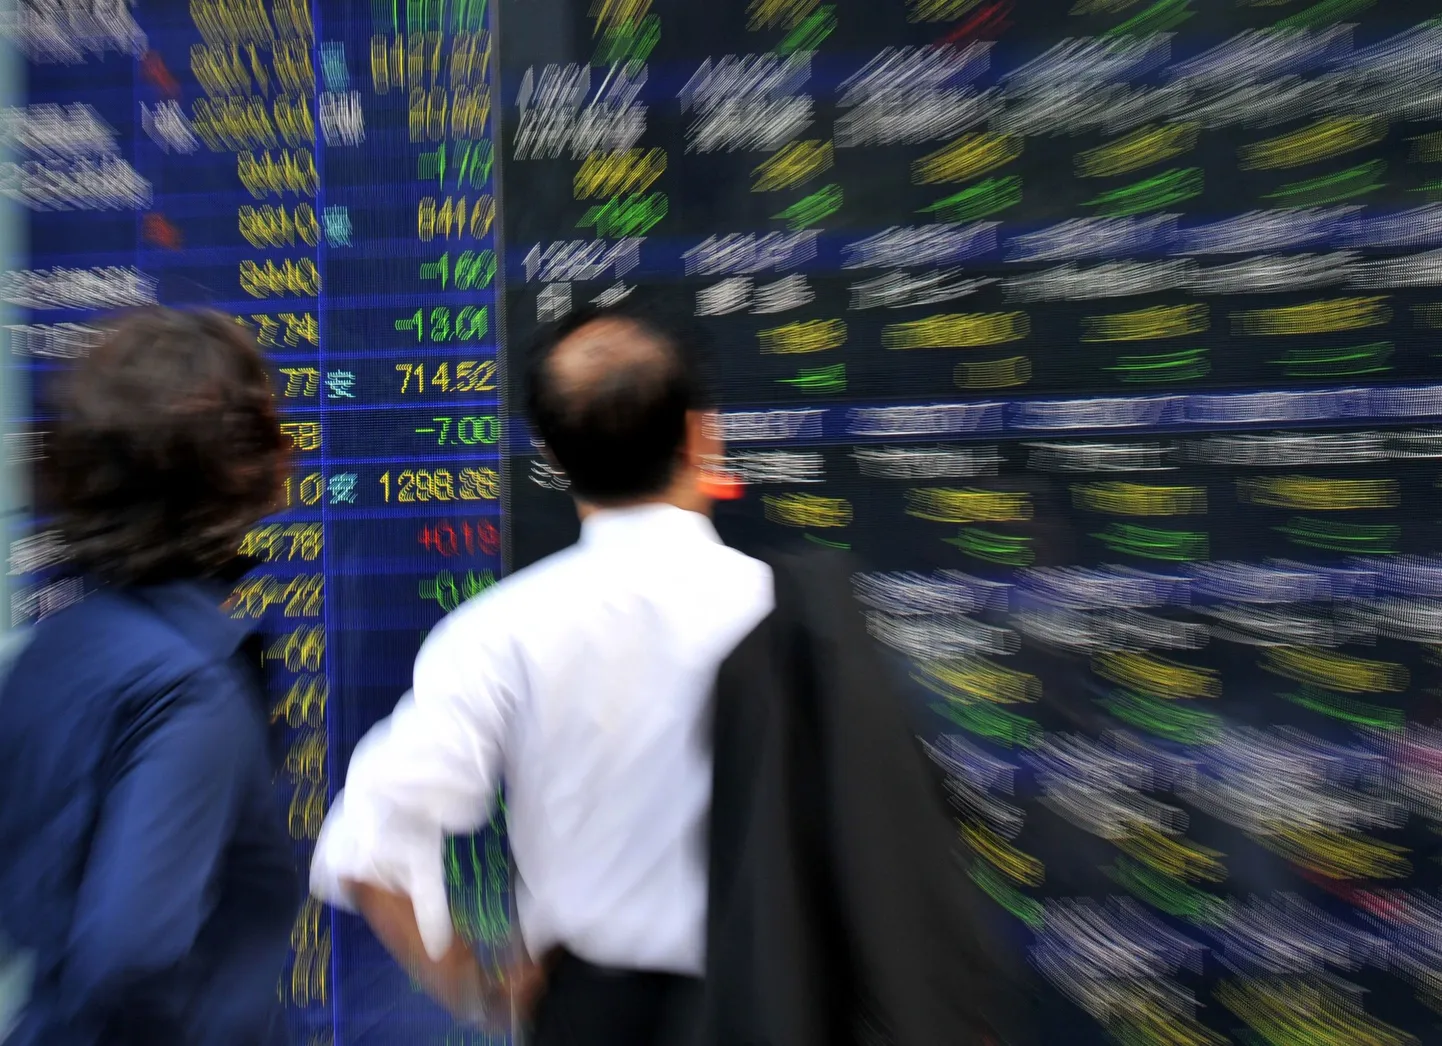 A businessman gazes at a share prices board in Tokyo on June 8, 2012. Japan's share prices dropped 180.46 points to close at 8,459.26 points at the Tokyo Stock Exchange, despite positive Japanese economic growth data and China's decision to cut interest rates.   AFP PHOTO / Yoshikazu TSUNO